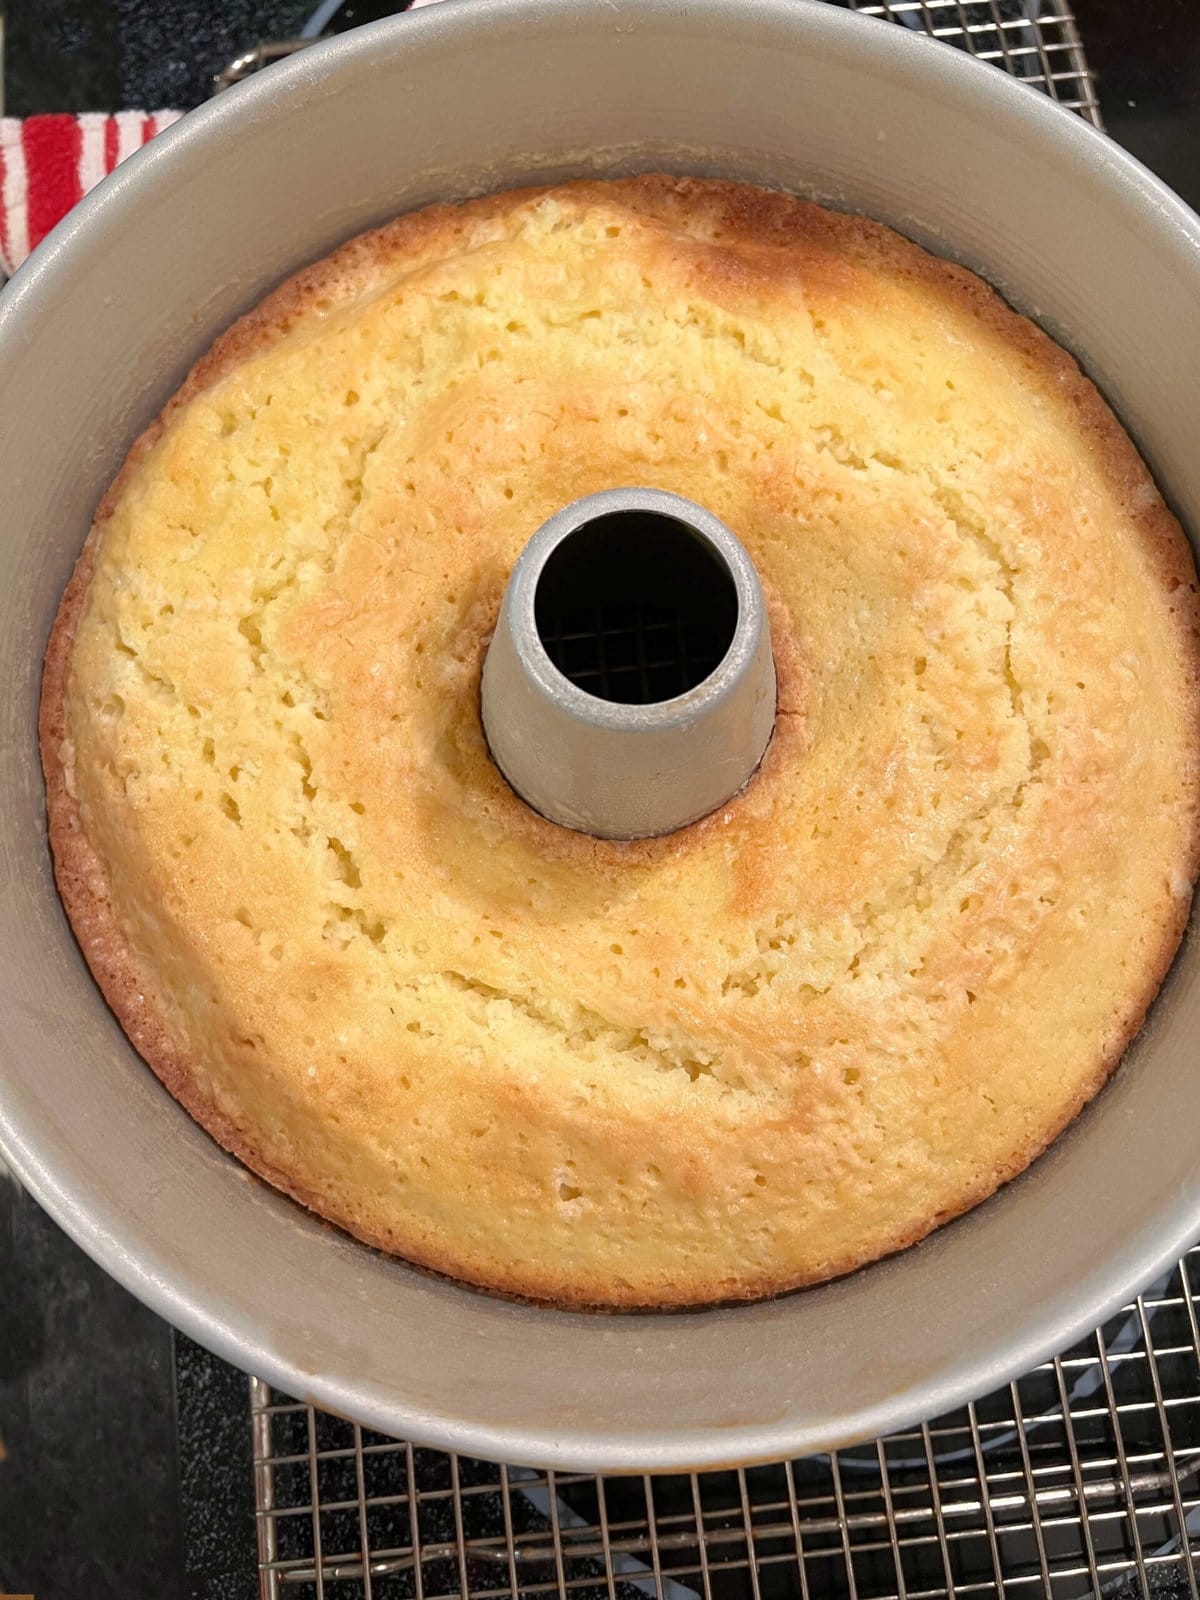 Freshly baked Five Flavor Pound Cake.